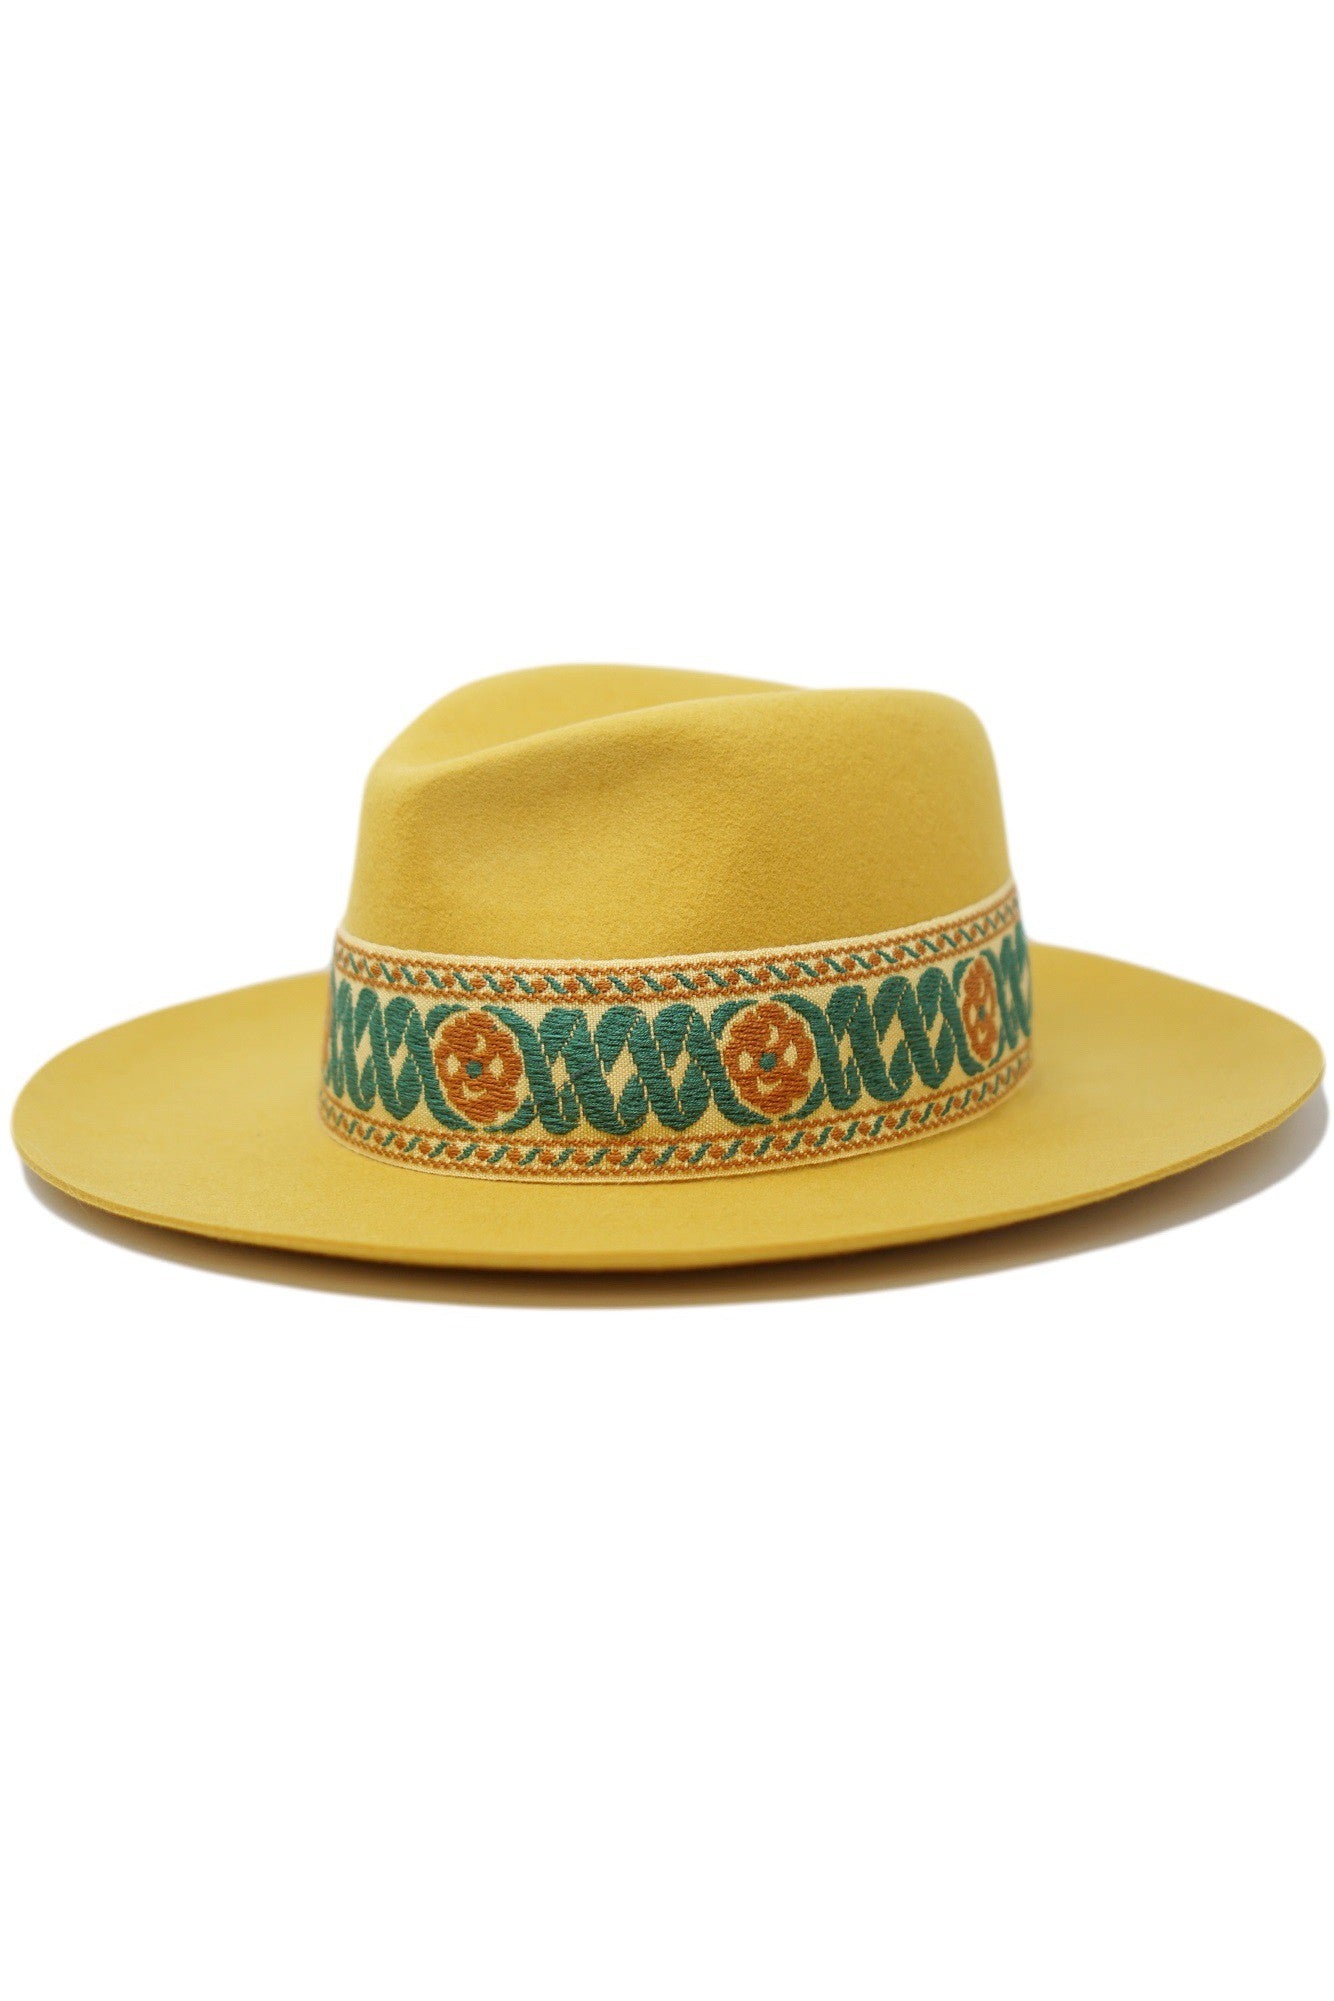 Olive & Pique - MAXIME Pinched crown fedora with detailed band.